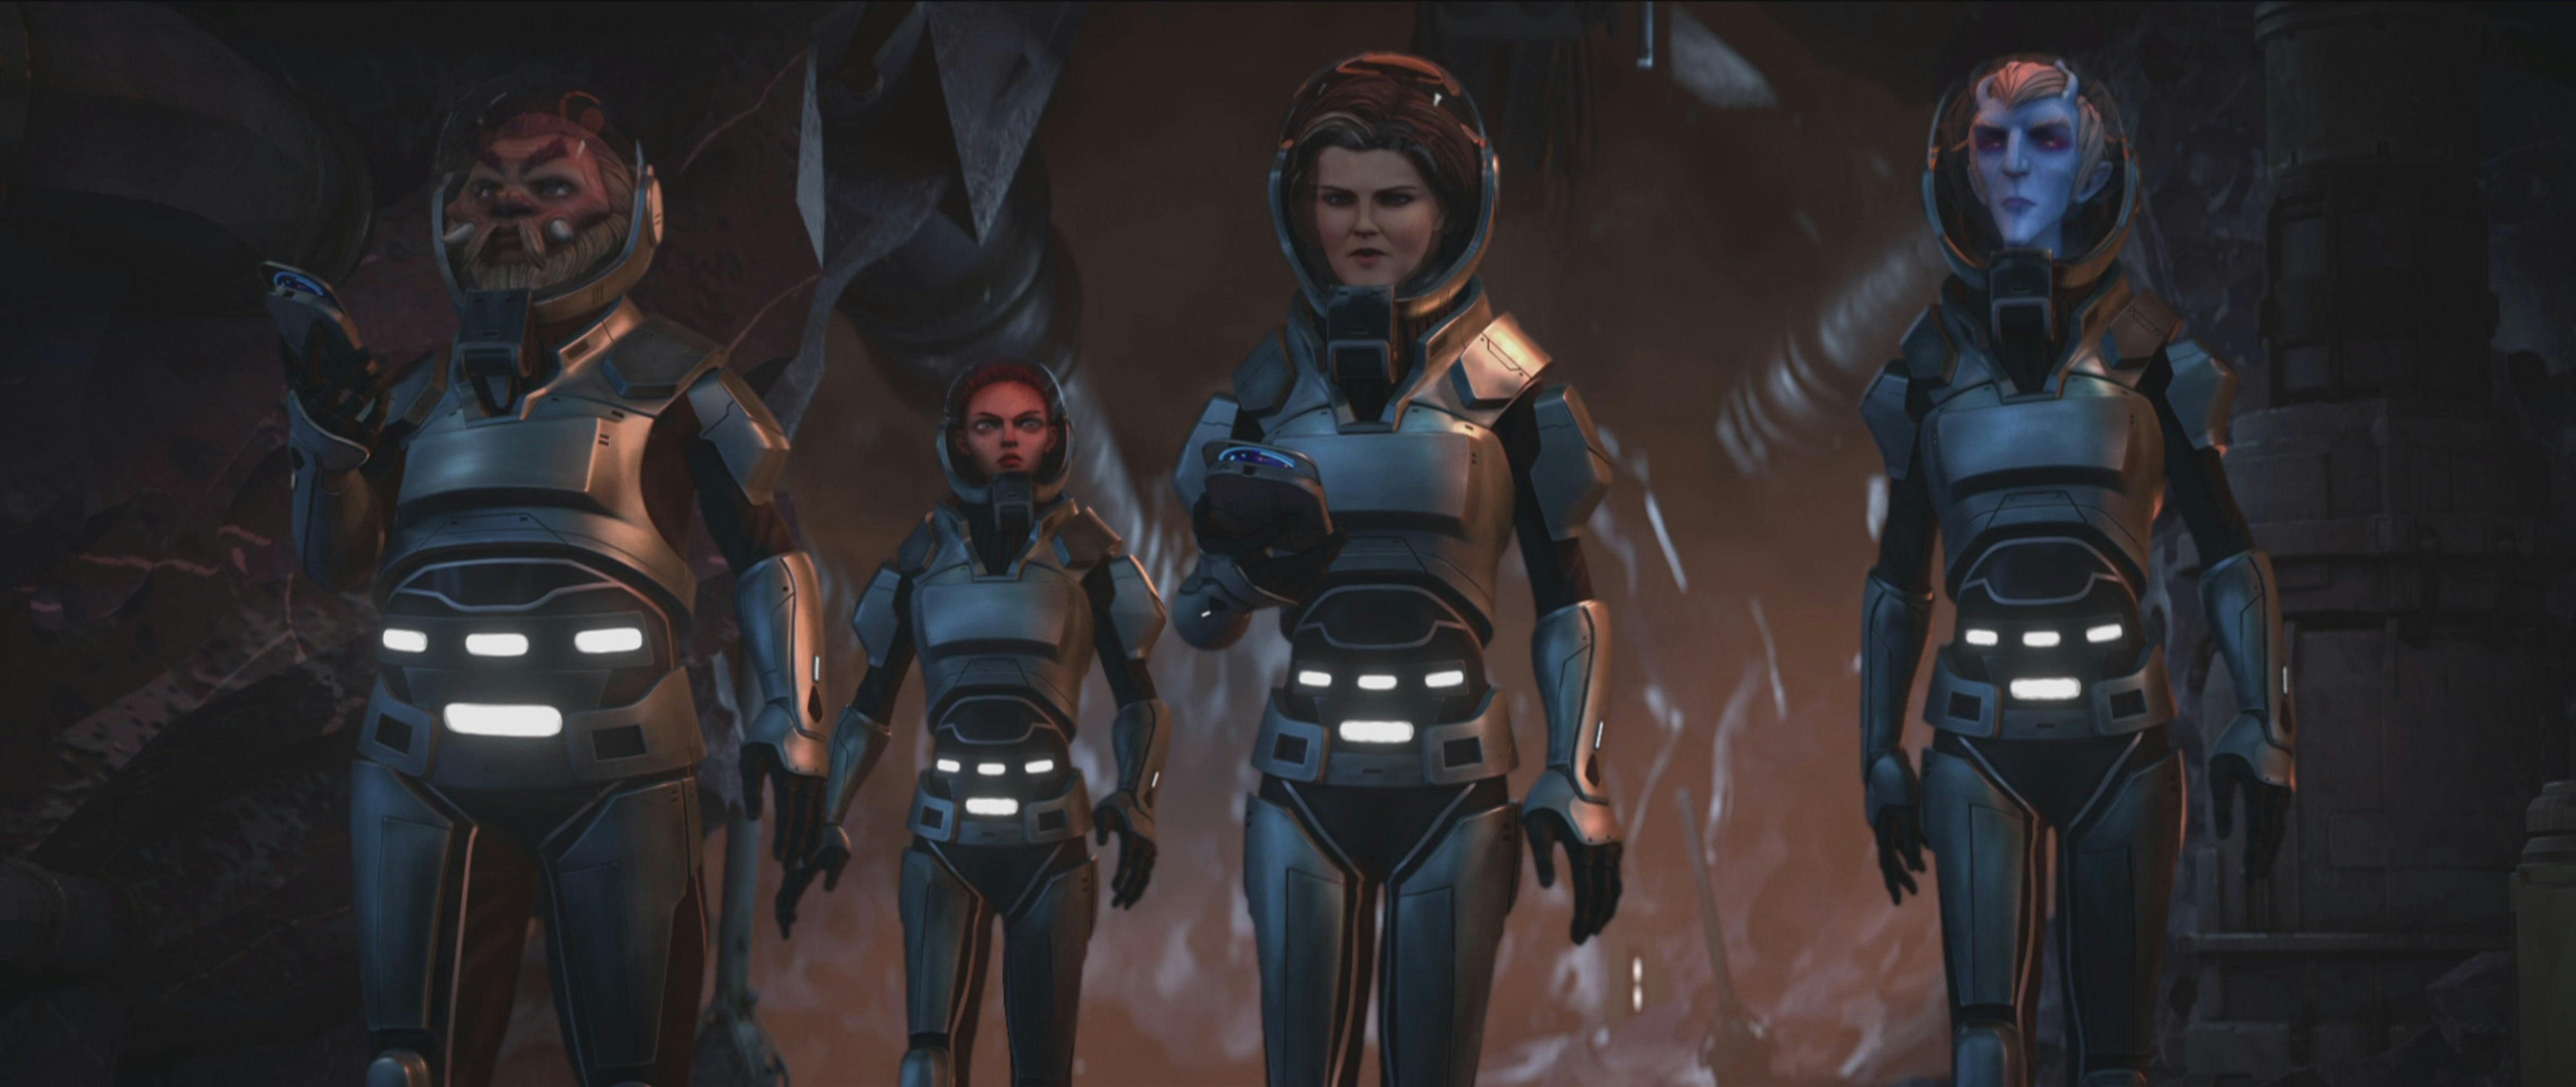 Dr. Noum, Commander Tysess, Vice Admiral Janeway, and Ensign Ascencia survey a planet's surface in space suits on Star Trek: Prodigy